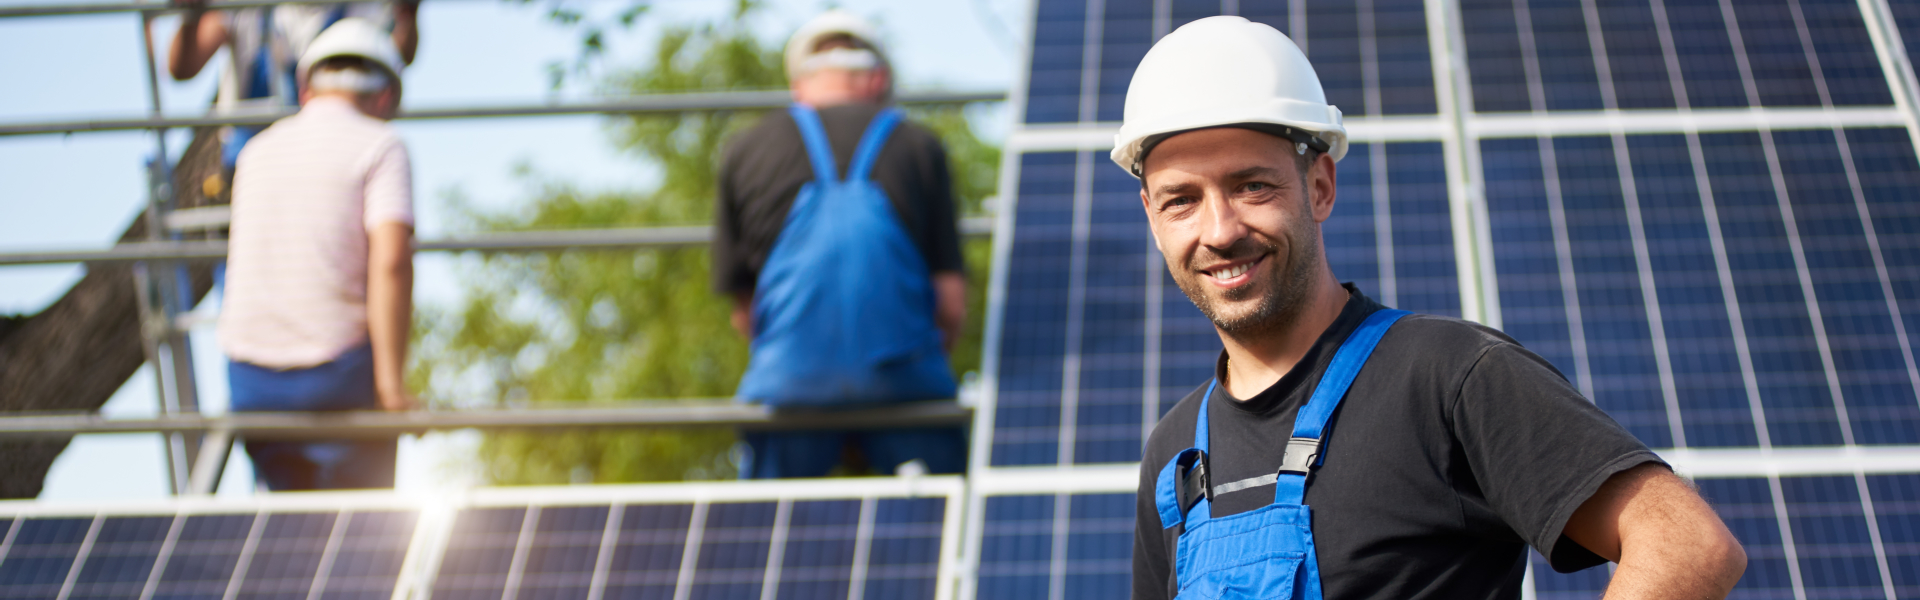 Portrait of smiling successful engineer technician standing in front of unfinished high exterior solar panel